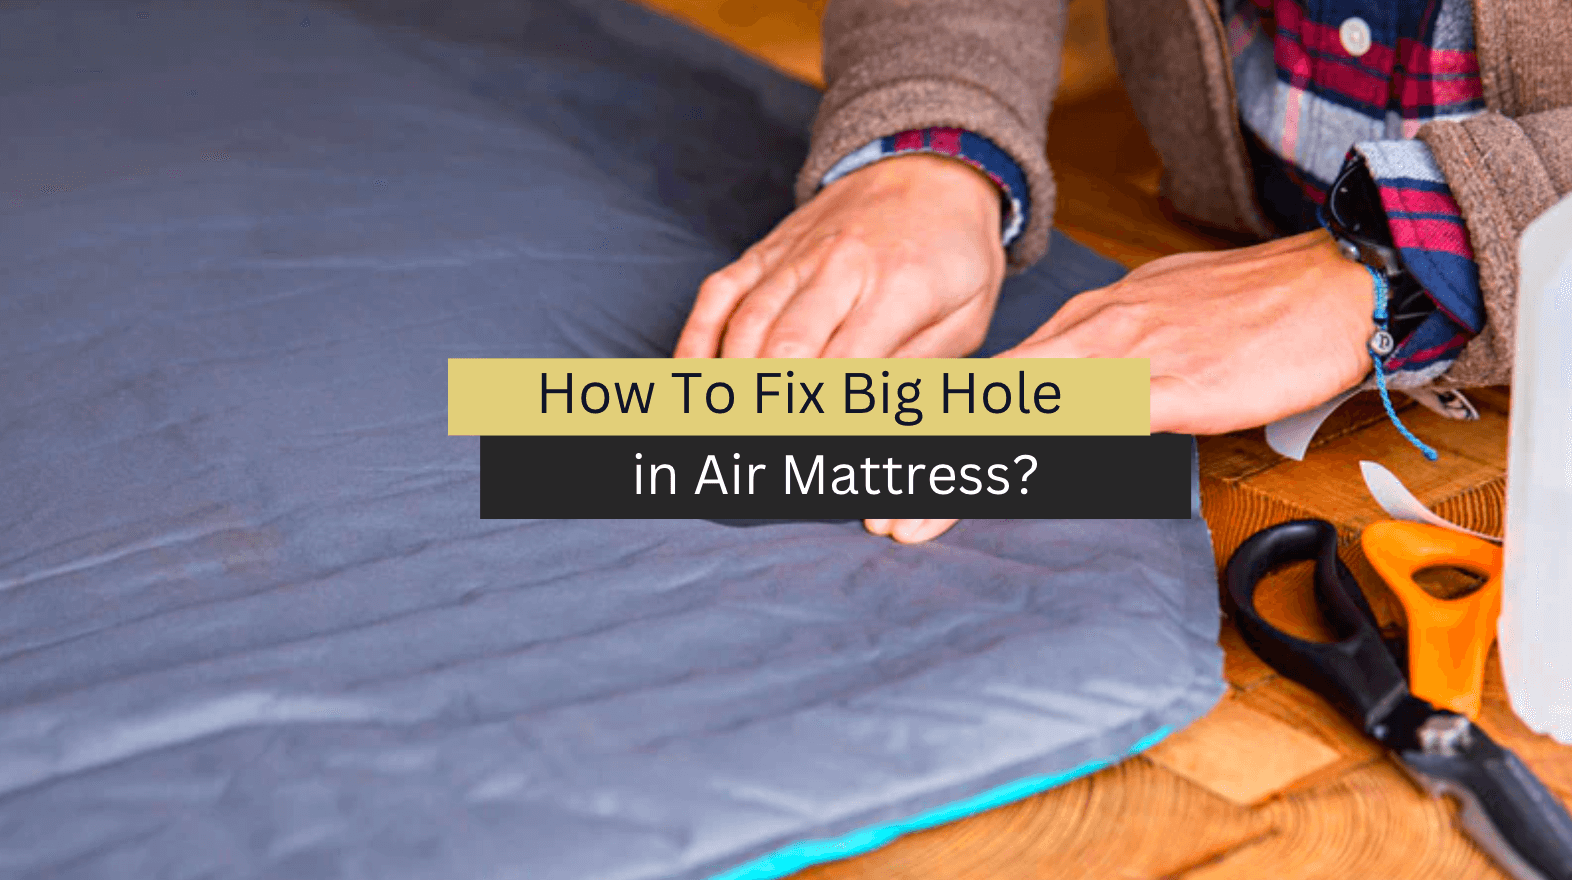 How To Fix Big Hole in Air Mattress? (A Step-By-Step Guide)